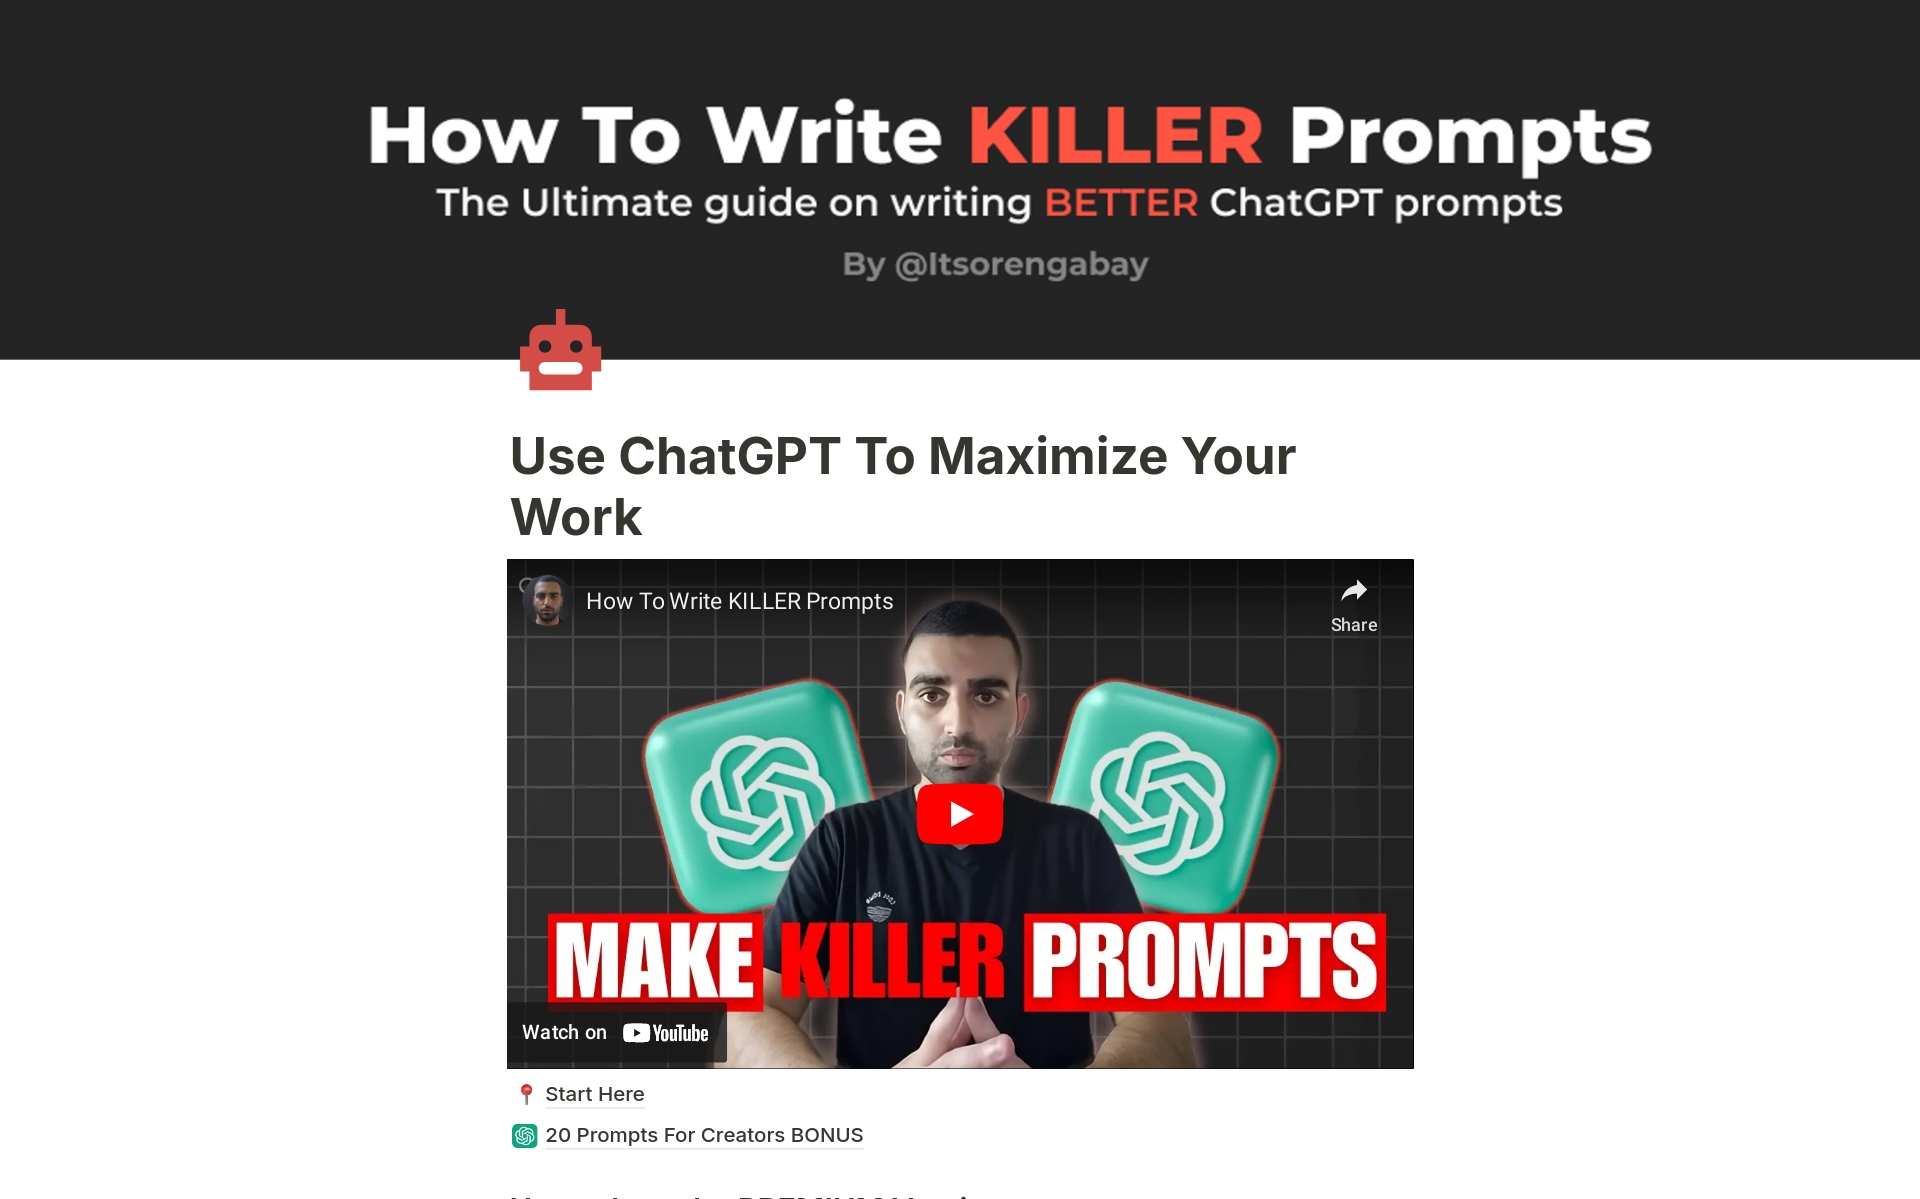 How To Talk To ChatGPT As a Creator: Gain Access to 20 Power Prompts for ChatGPT to blow up your business